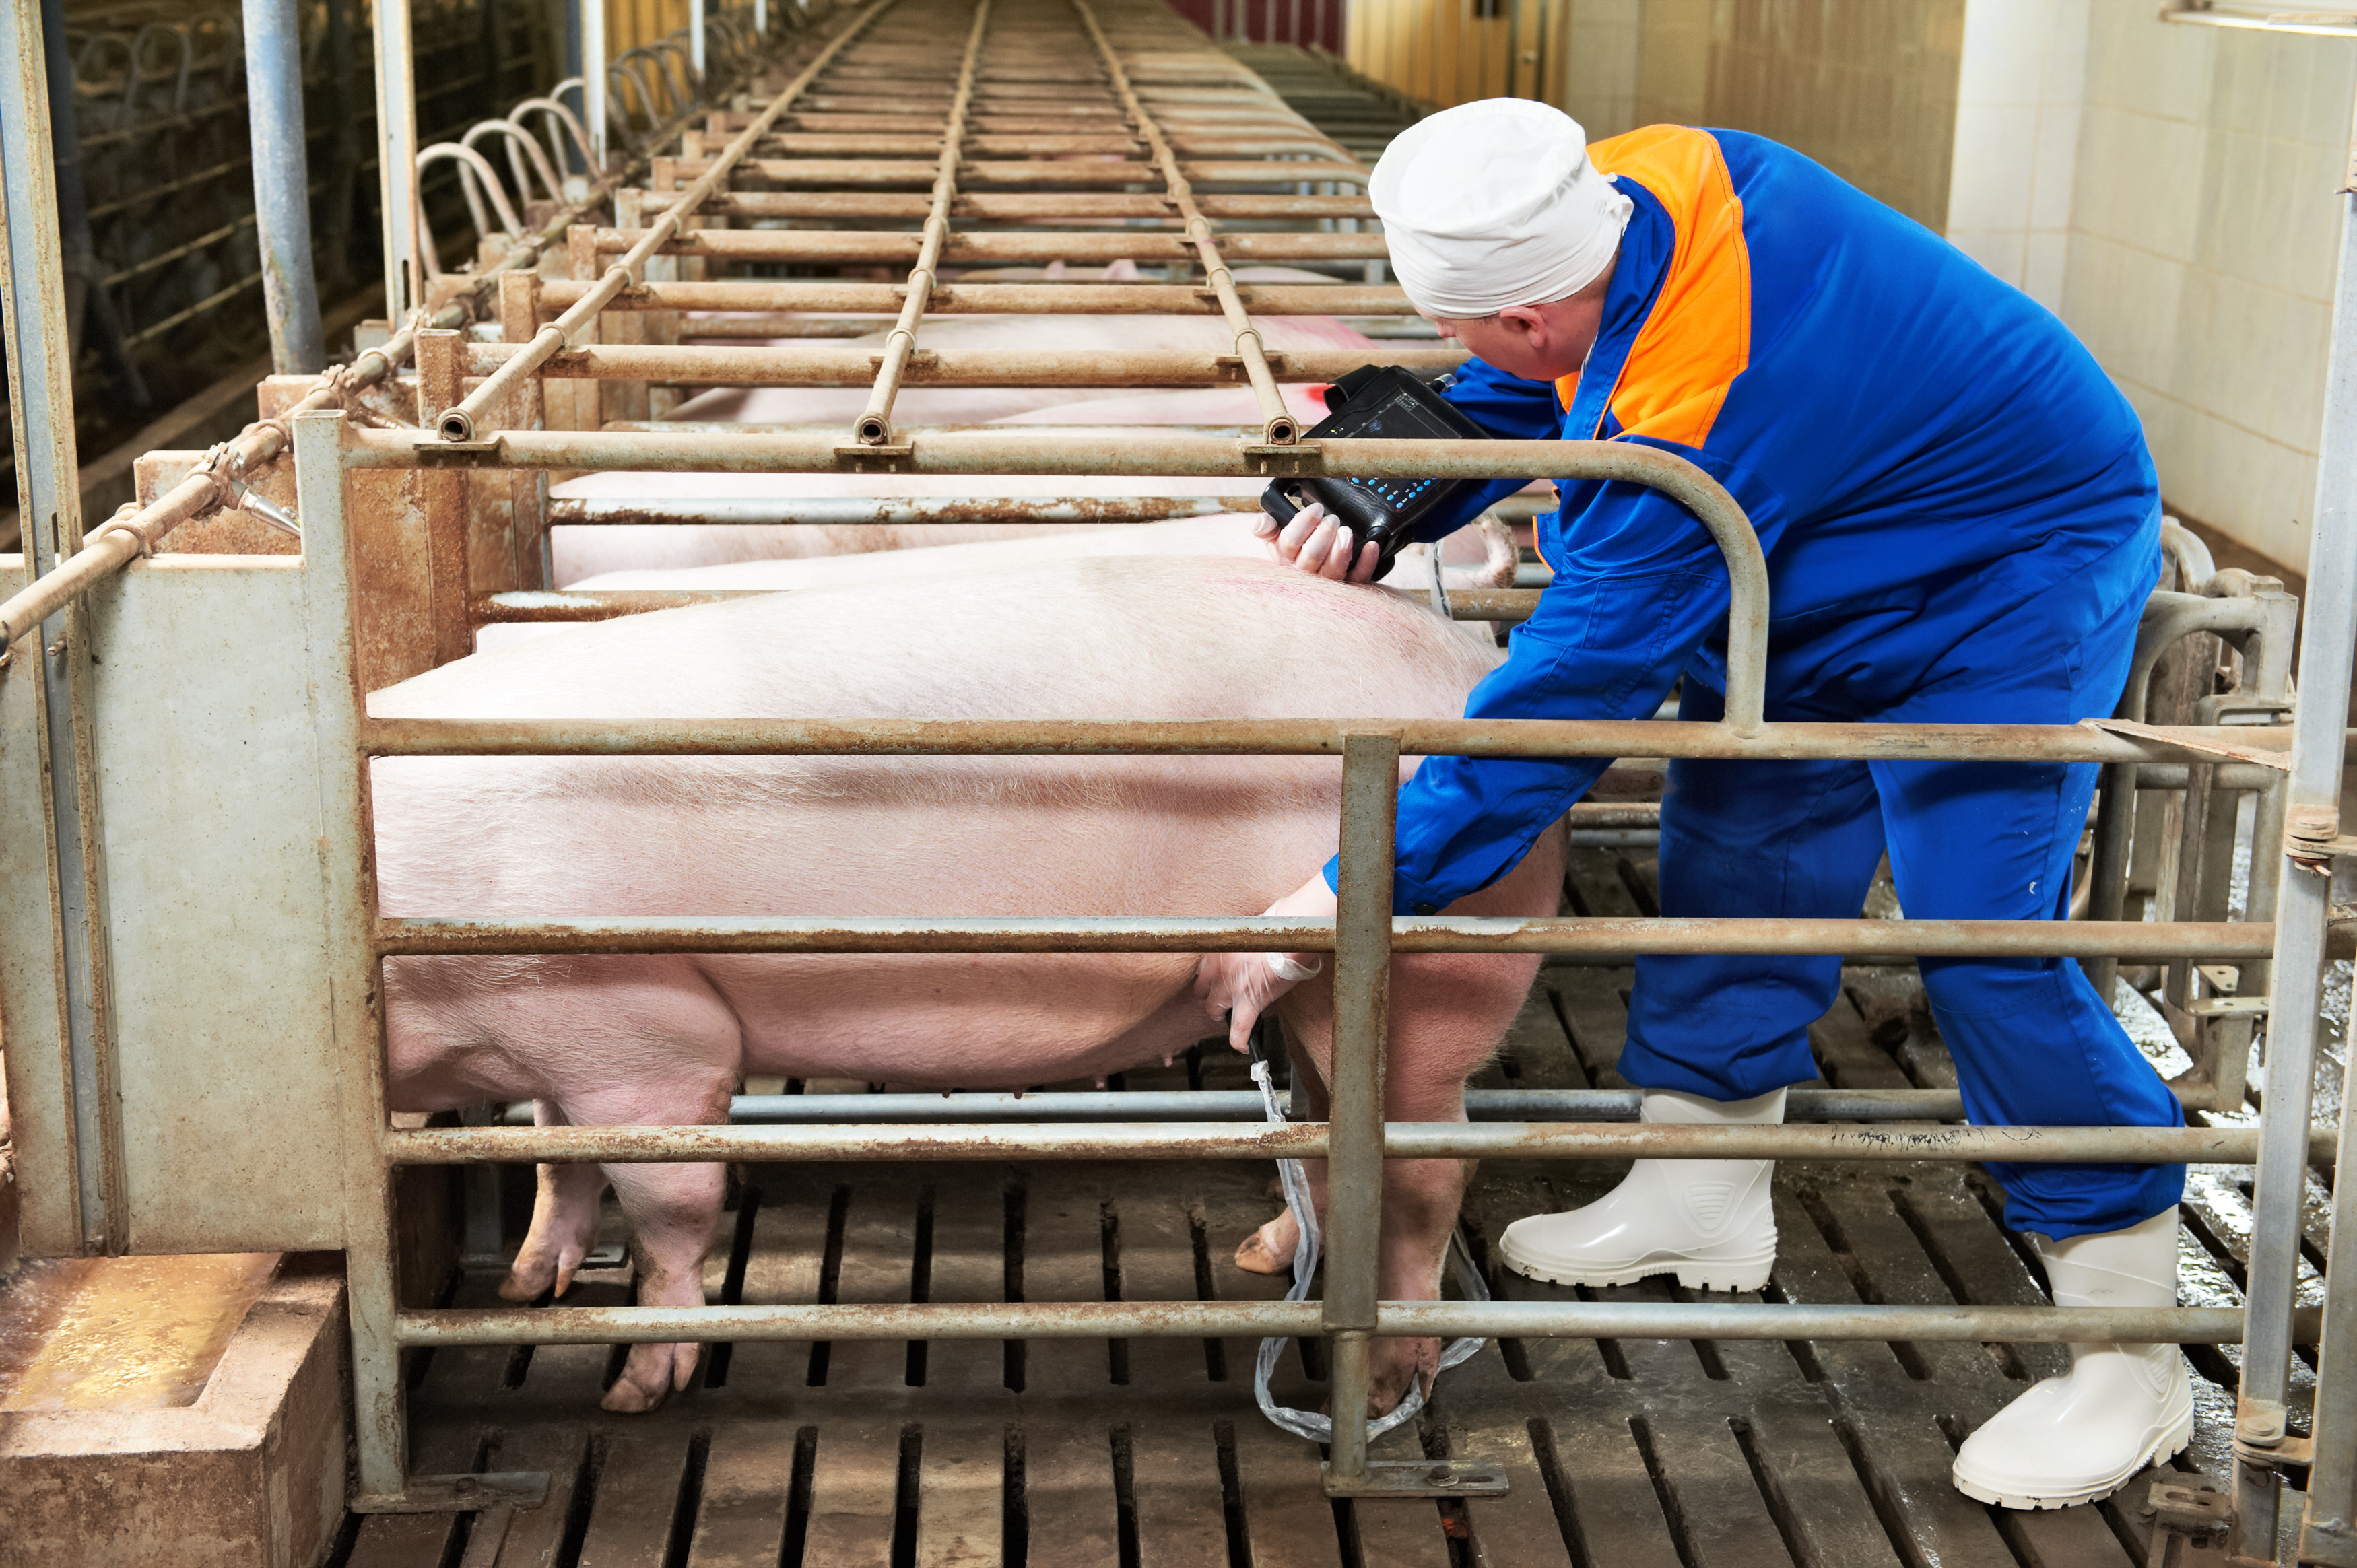 worker performing an ultrasound on a sow